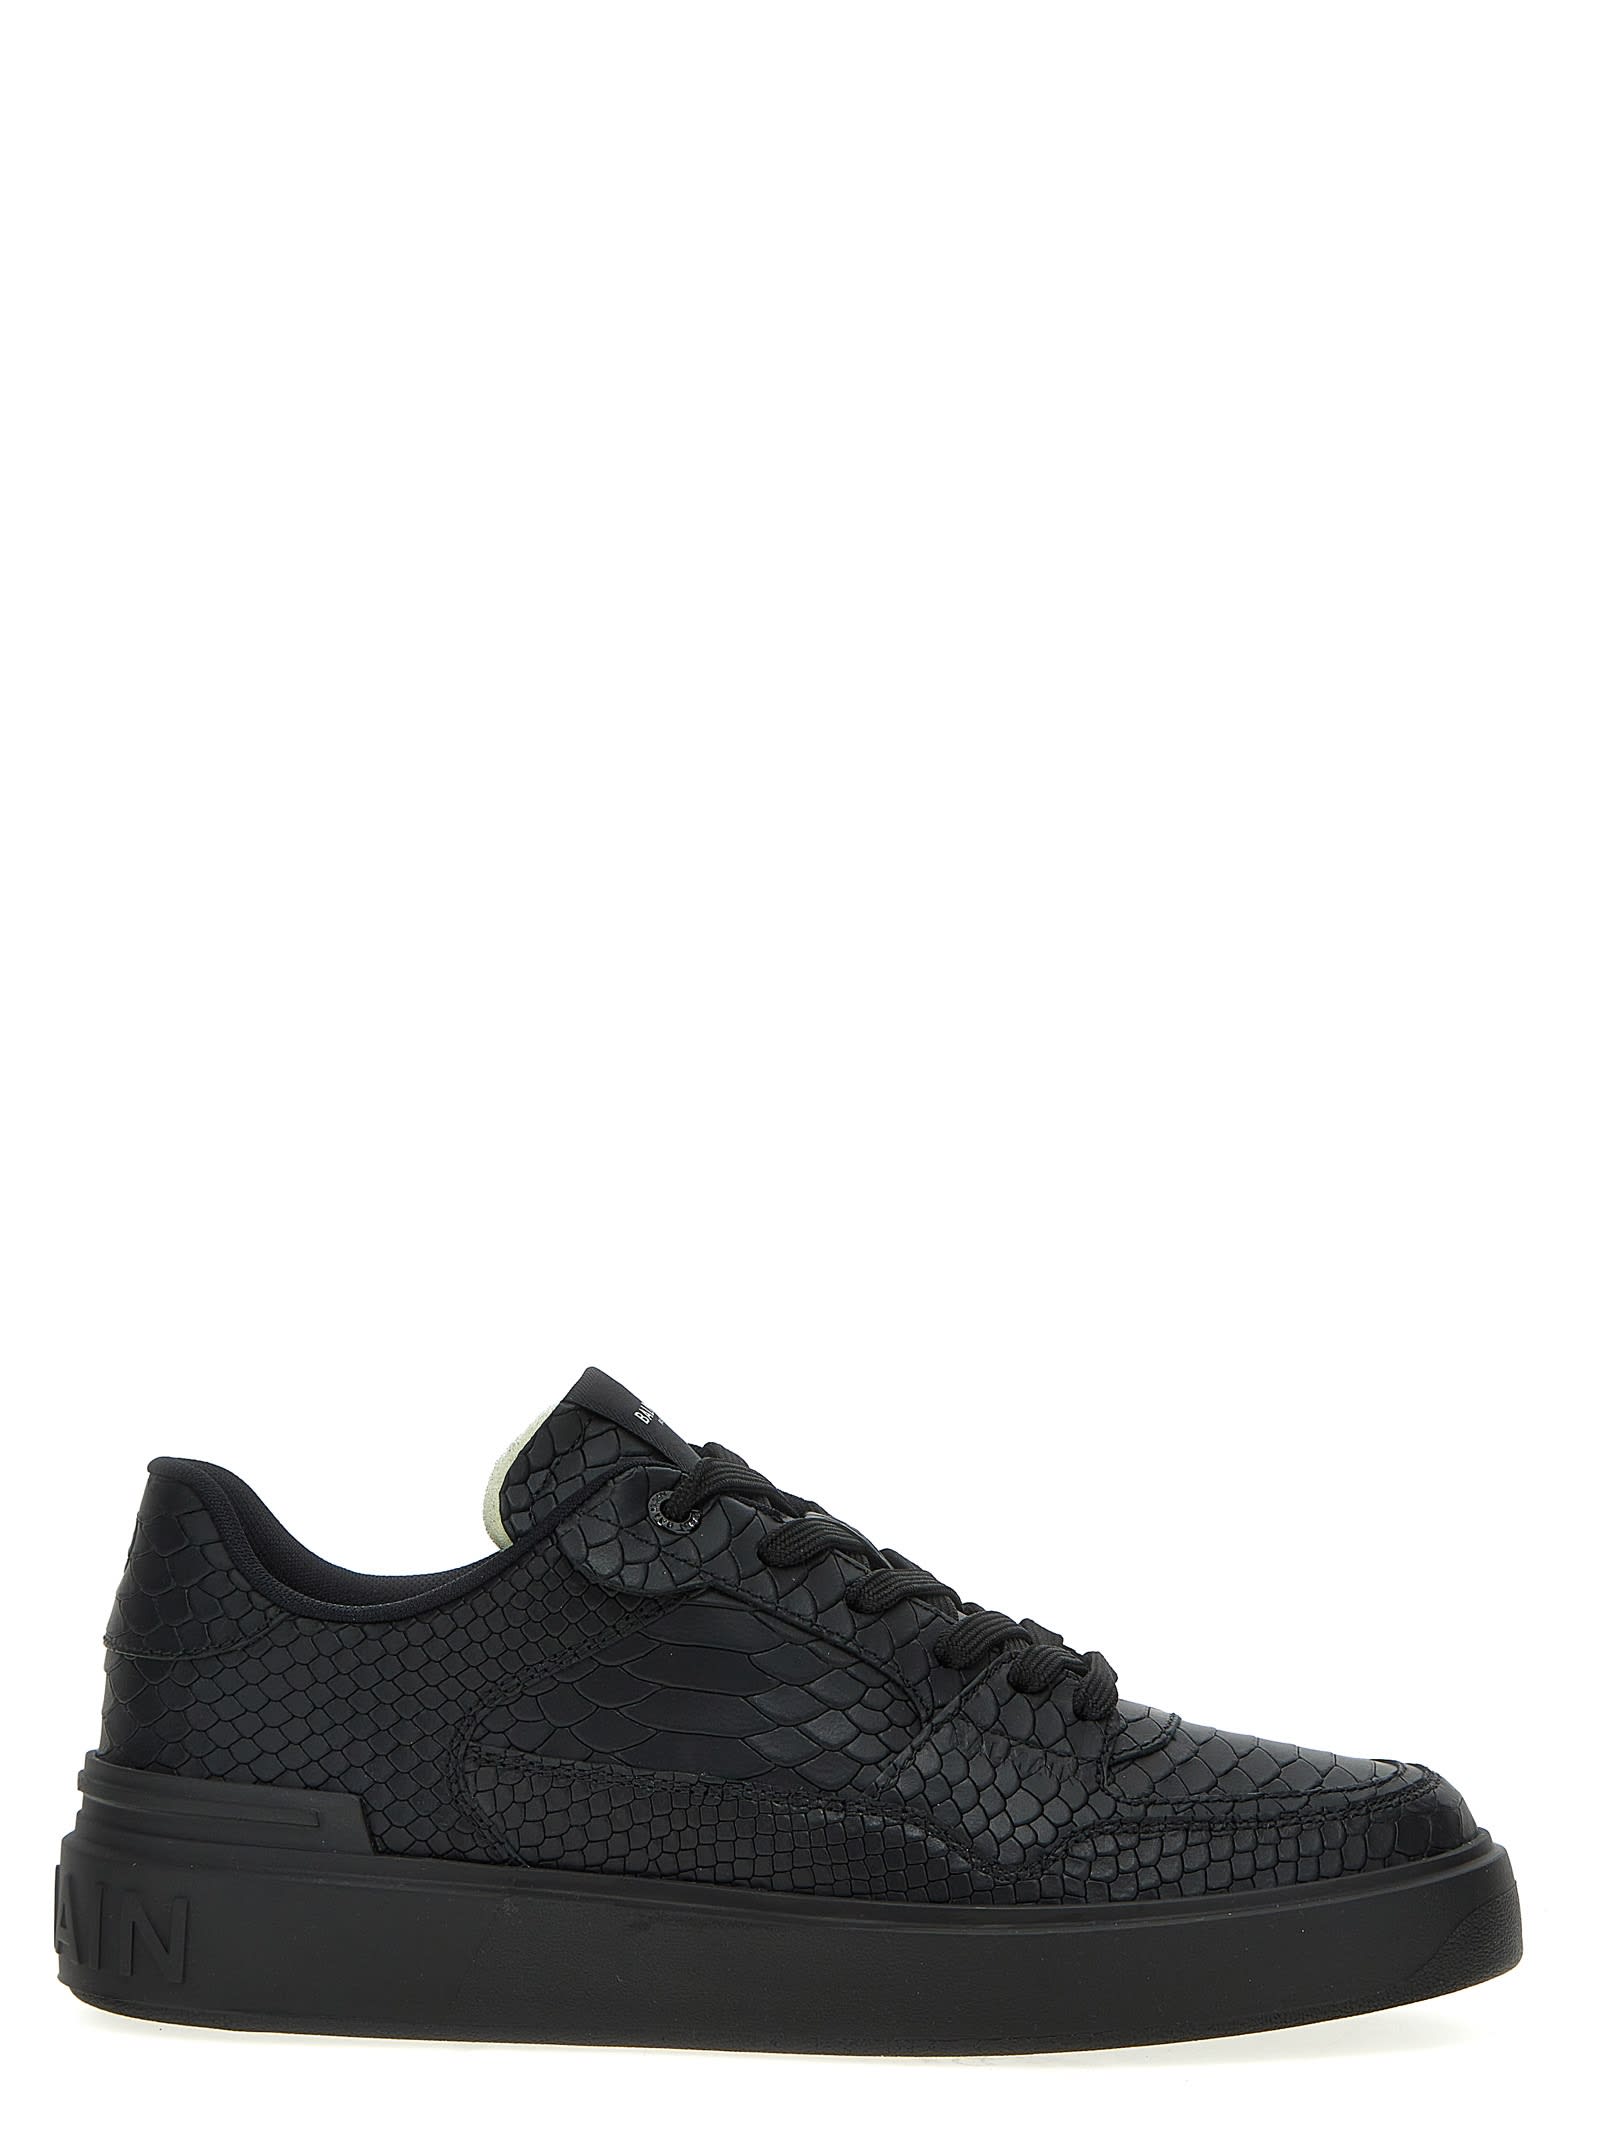 Balmain B-court Leather And Leather Sneakers